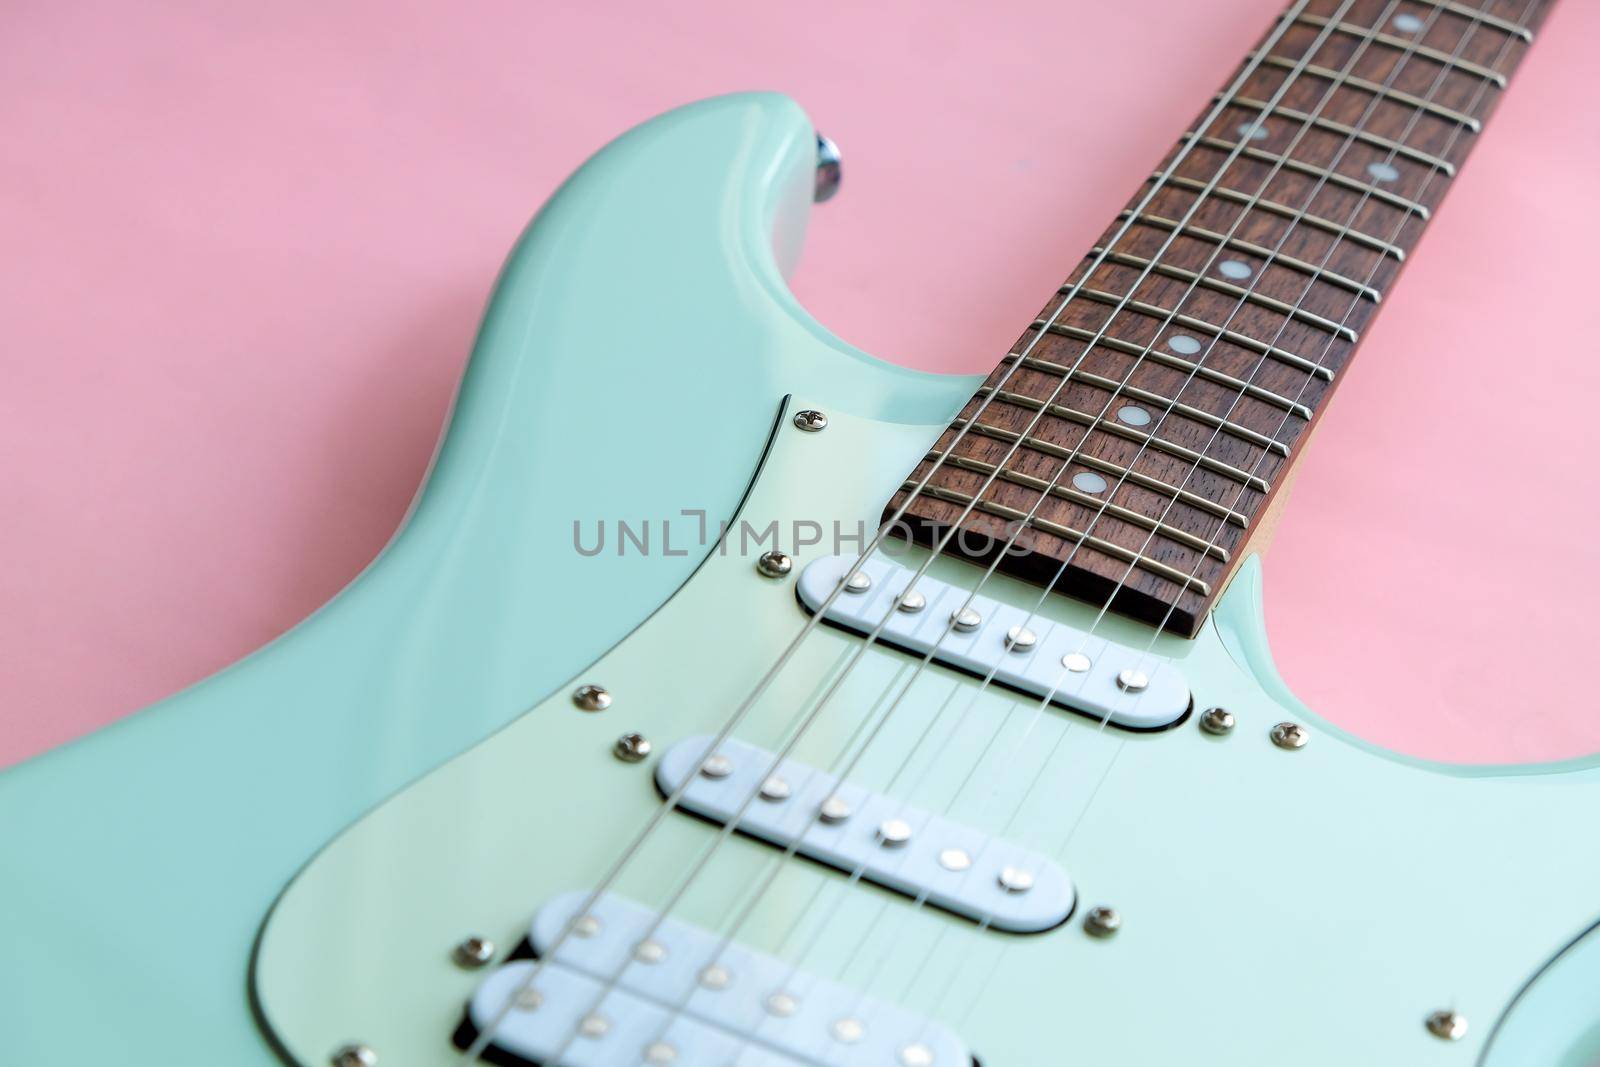 Detail of Mint Green Electric Guitar on a Pink background.